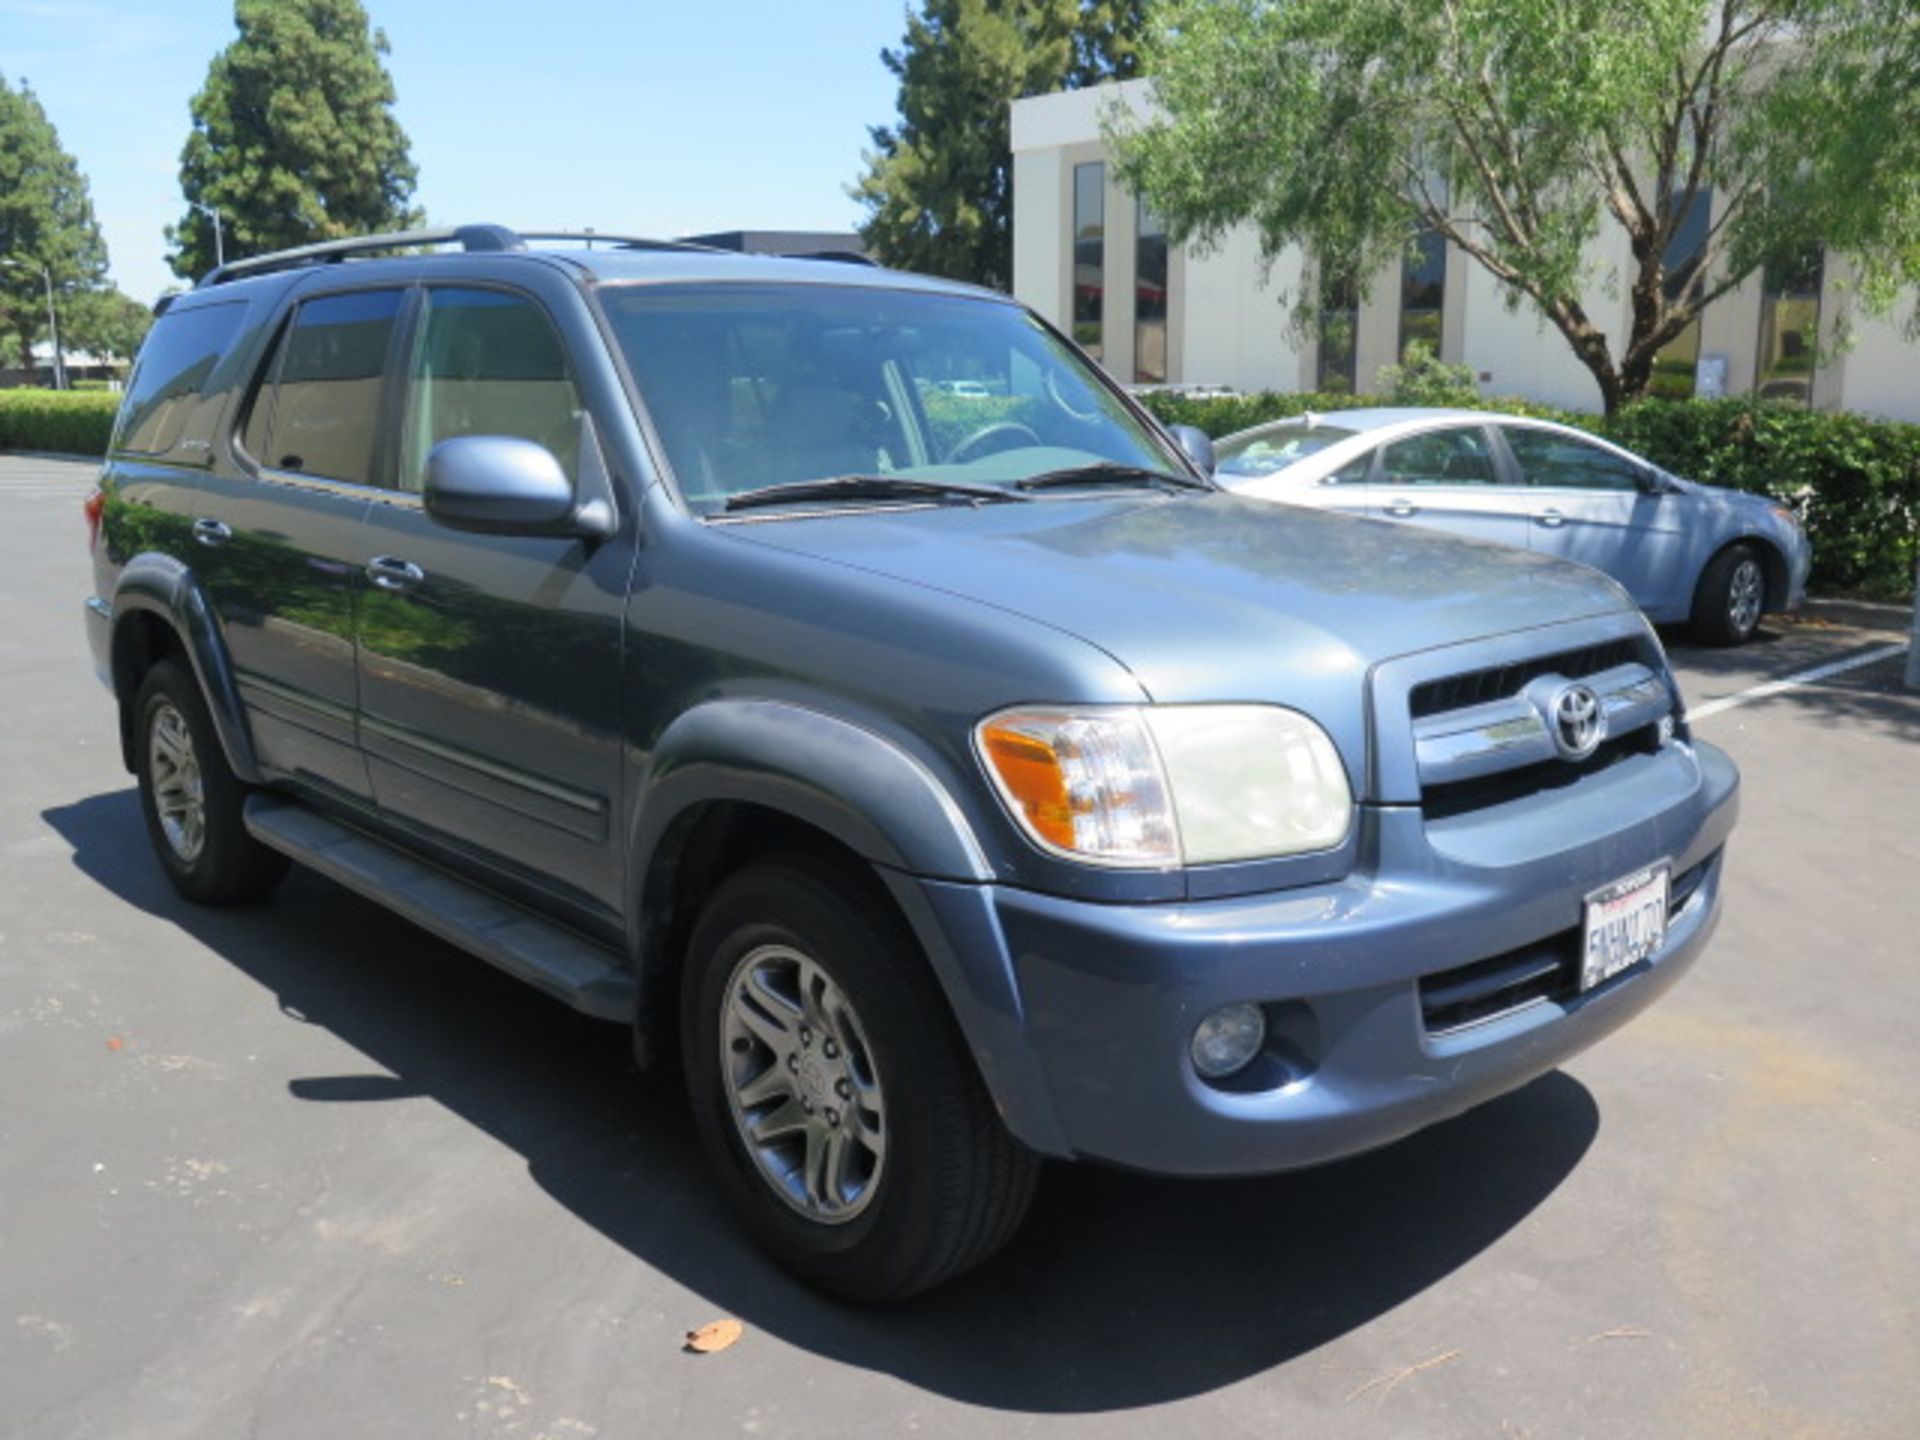 2005 Toyota Sequoia Limited SUV Lisc# 5NHN170 w/ 4.7L i-Force V8 Gas Engine, Automatic Trans, AC, - Image 3 of 14